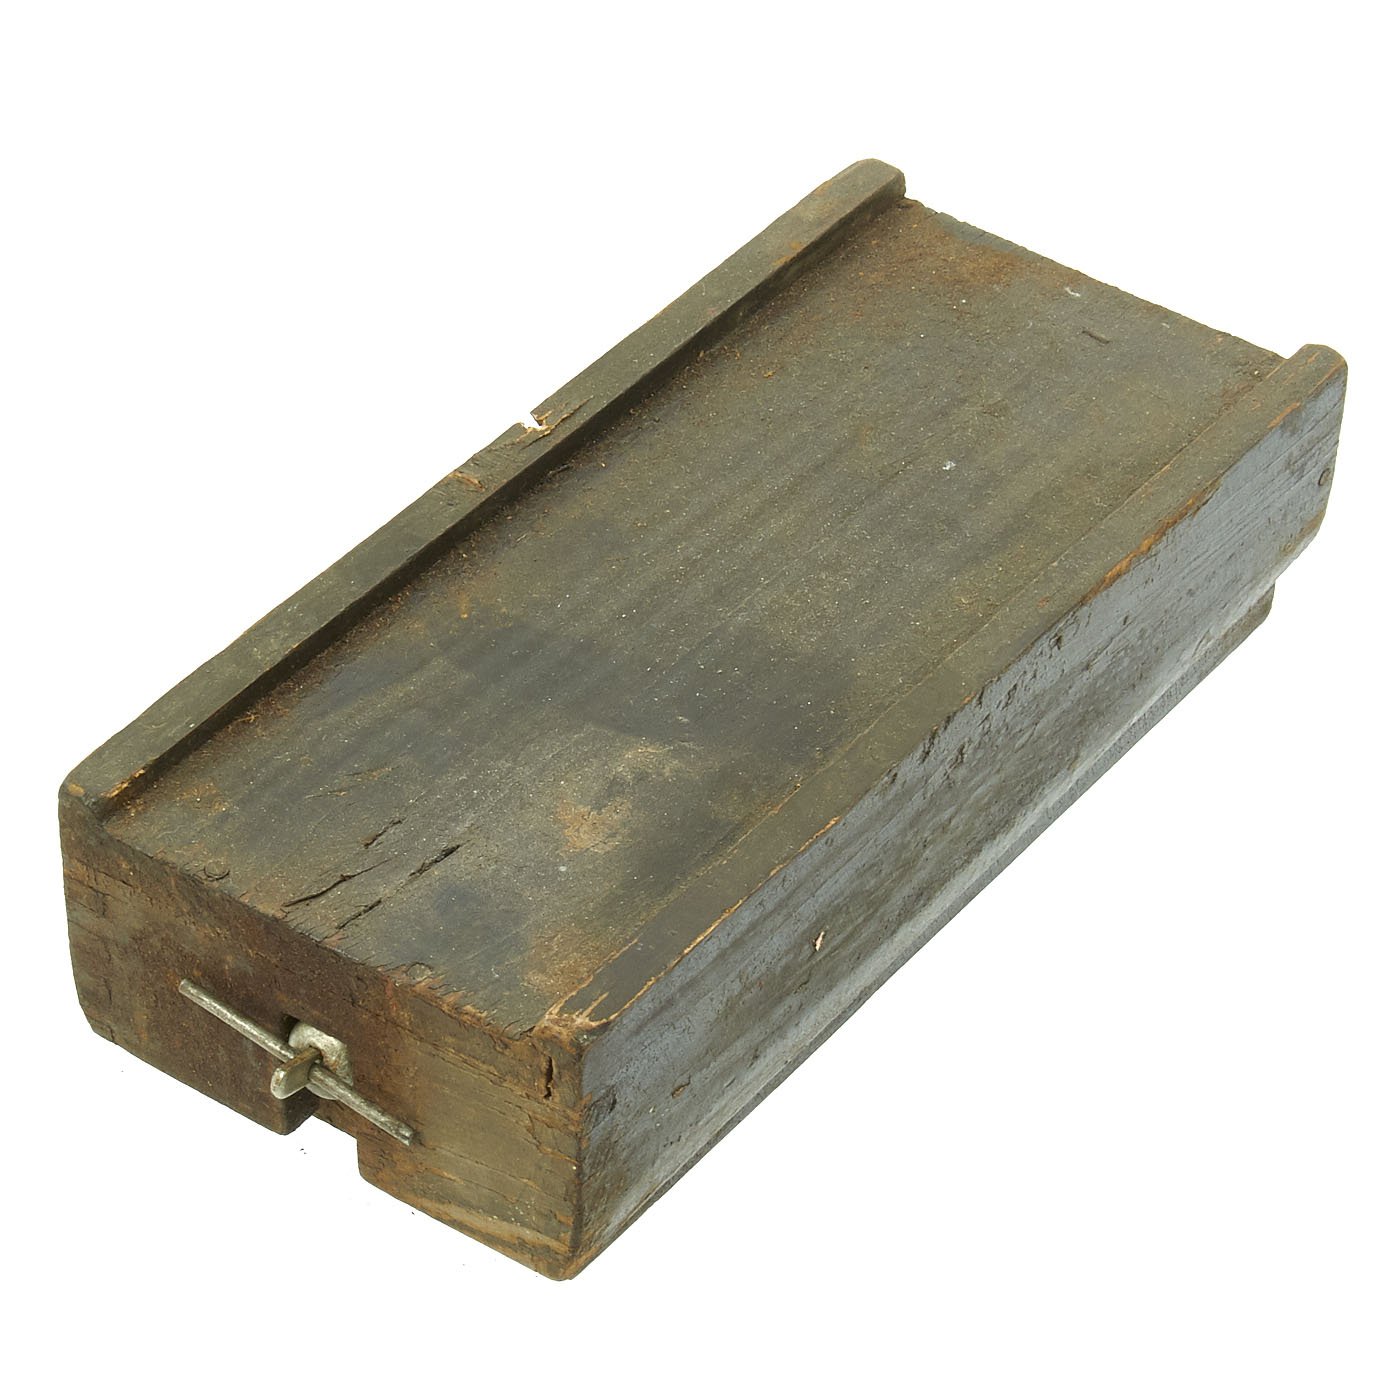 Original Russian WWII PMD-6M Wooden Box Mine with Fuze and Replica